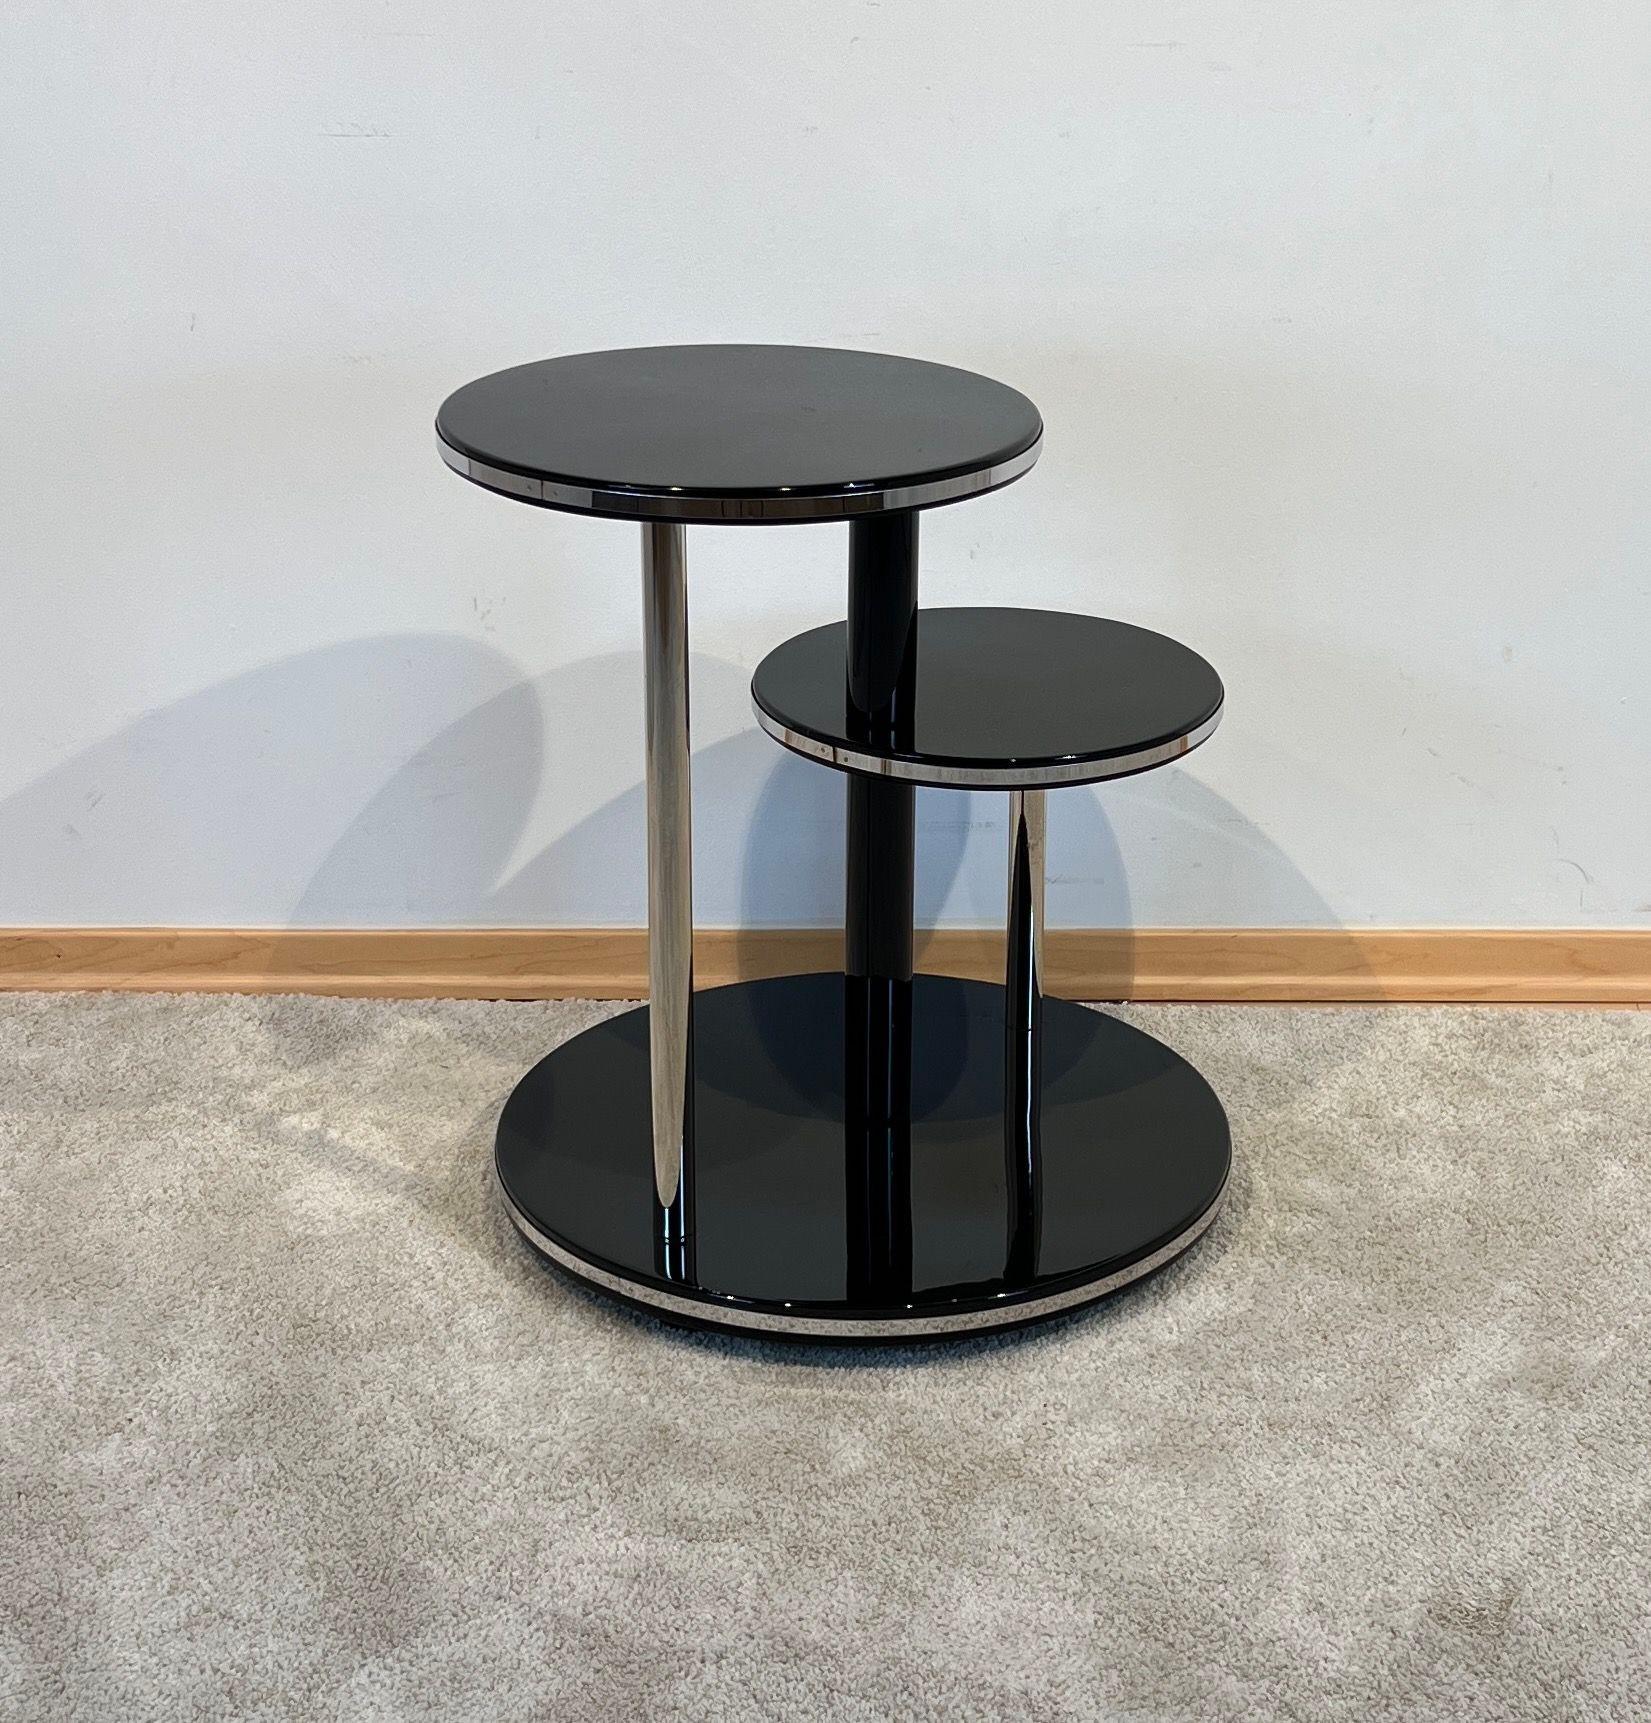 Art Deco Round Side Table, Black Lacquer, Chrome, Metal Trims, France circa 1930 In Good Condition For Sale In Regensburg, DE